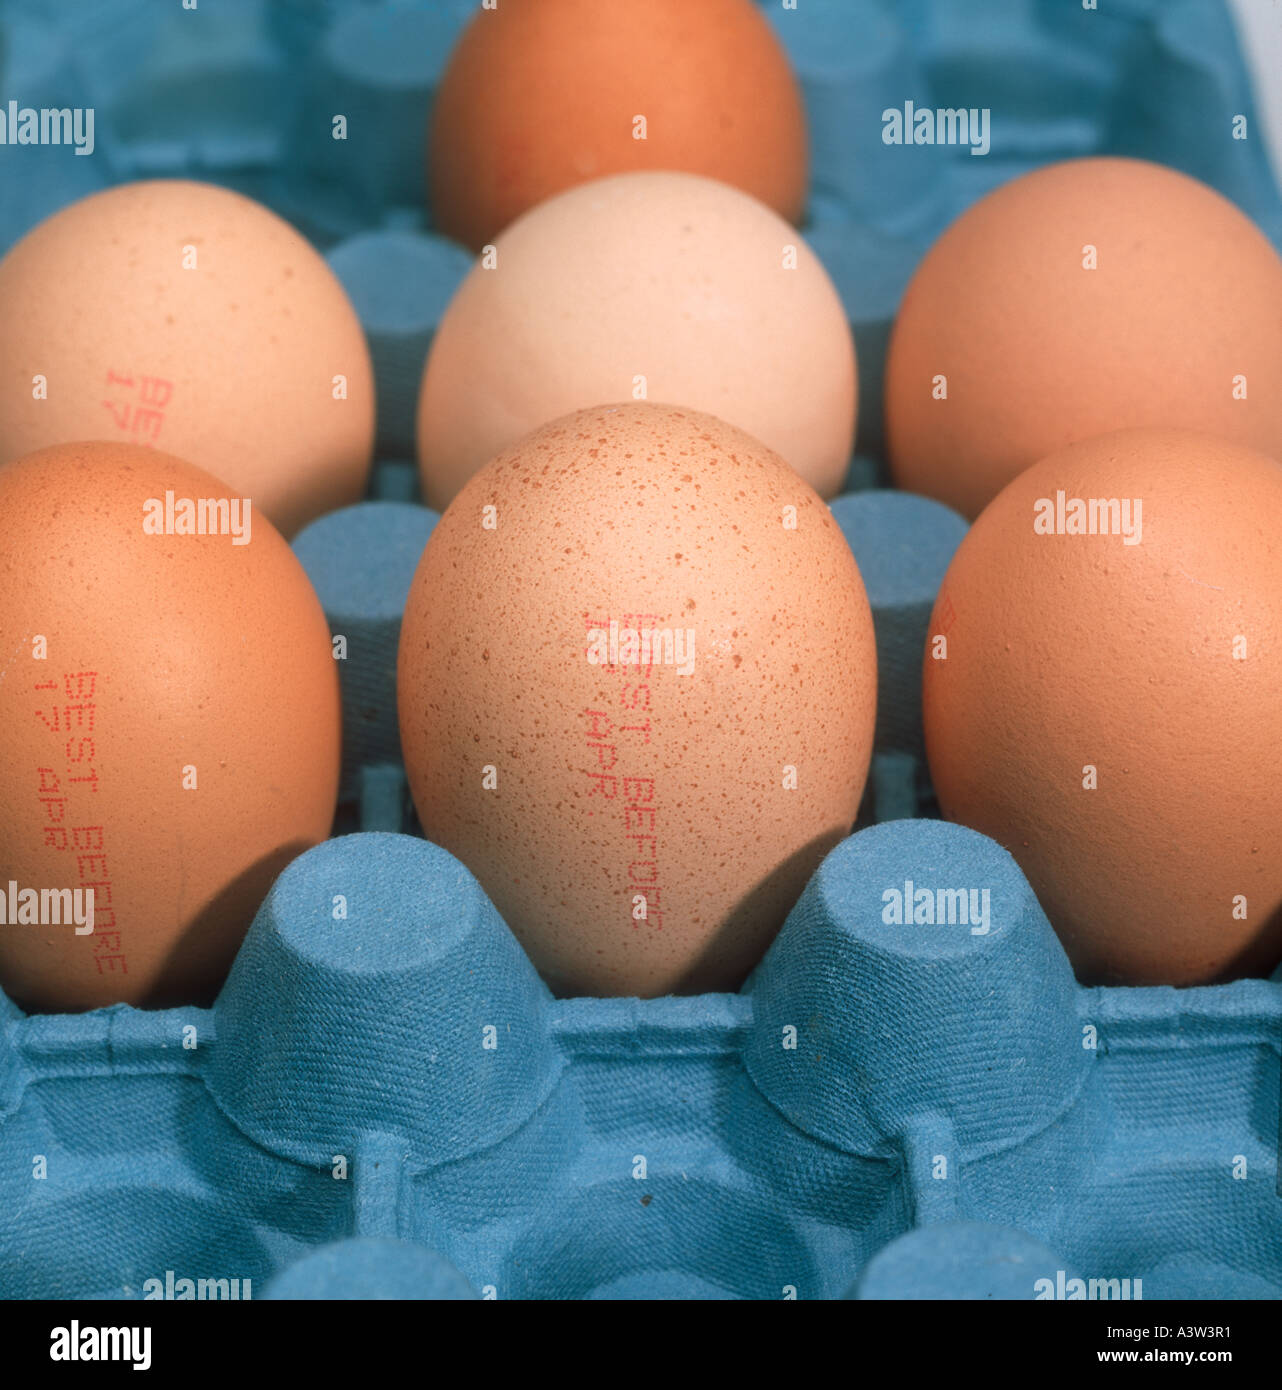 Eggs in an egg box showing best before date Stock Photo